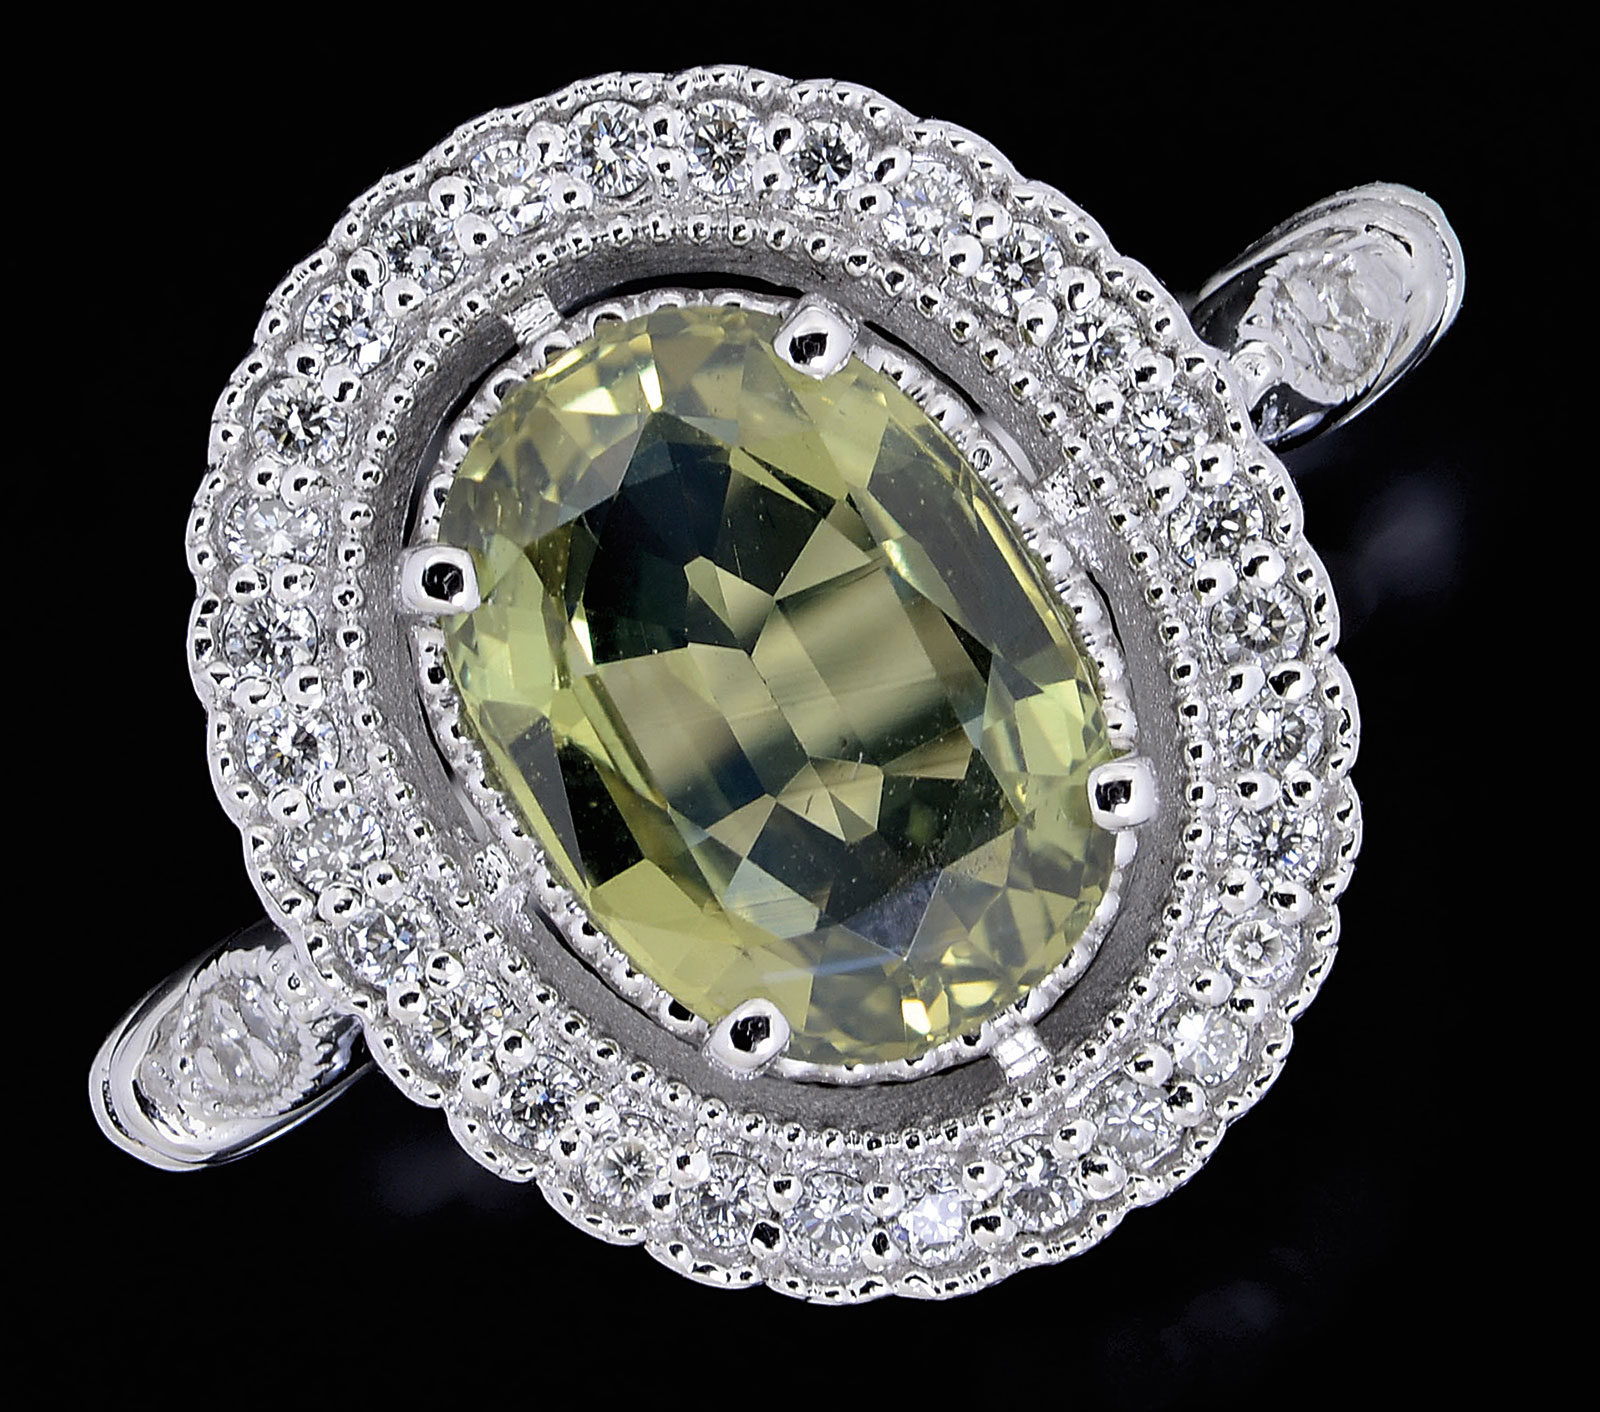 14kt Gold, Chrysoberyl, And Diamond Ring, estimated at $2,500-3,500.